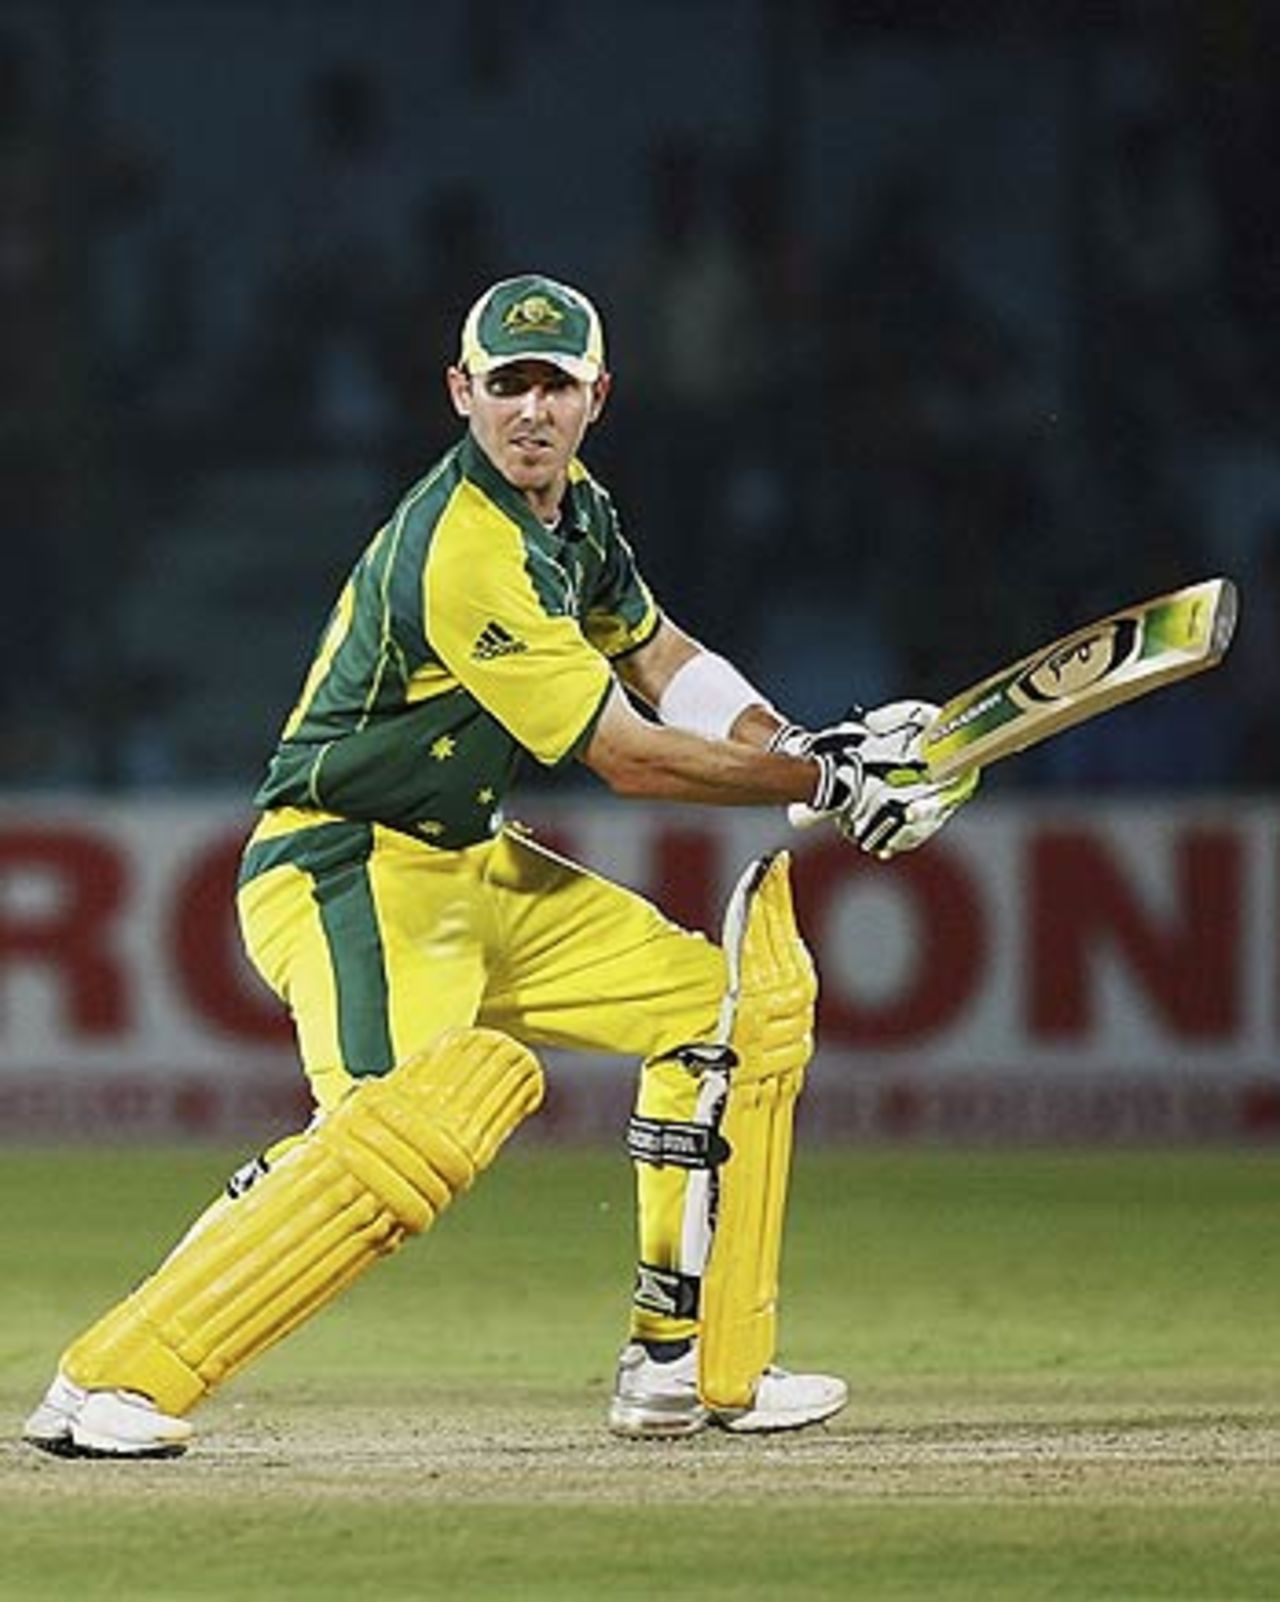 Damien Martyn in action during his match-winning 78, Australia v England, 6th match, Champions Trophy, Jaipur, October 21, 2006